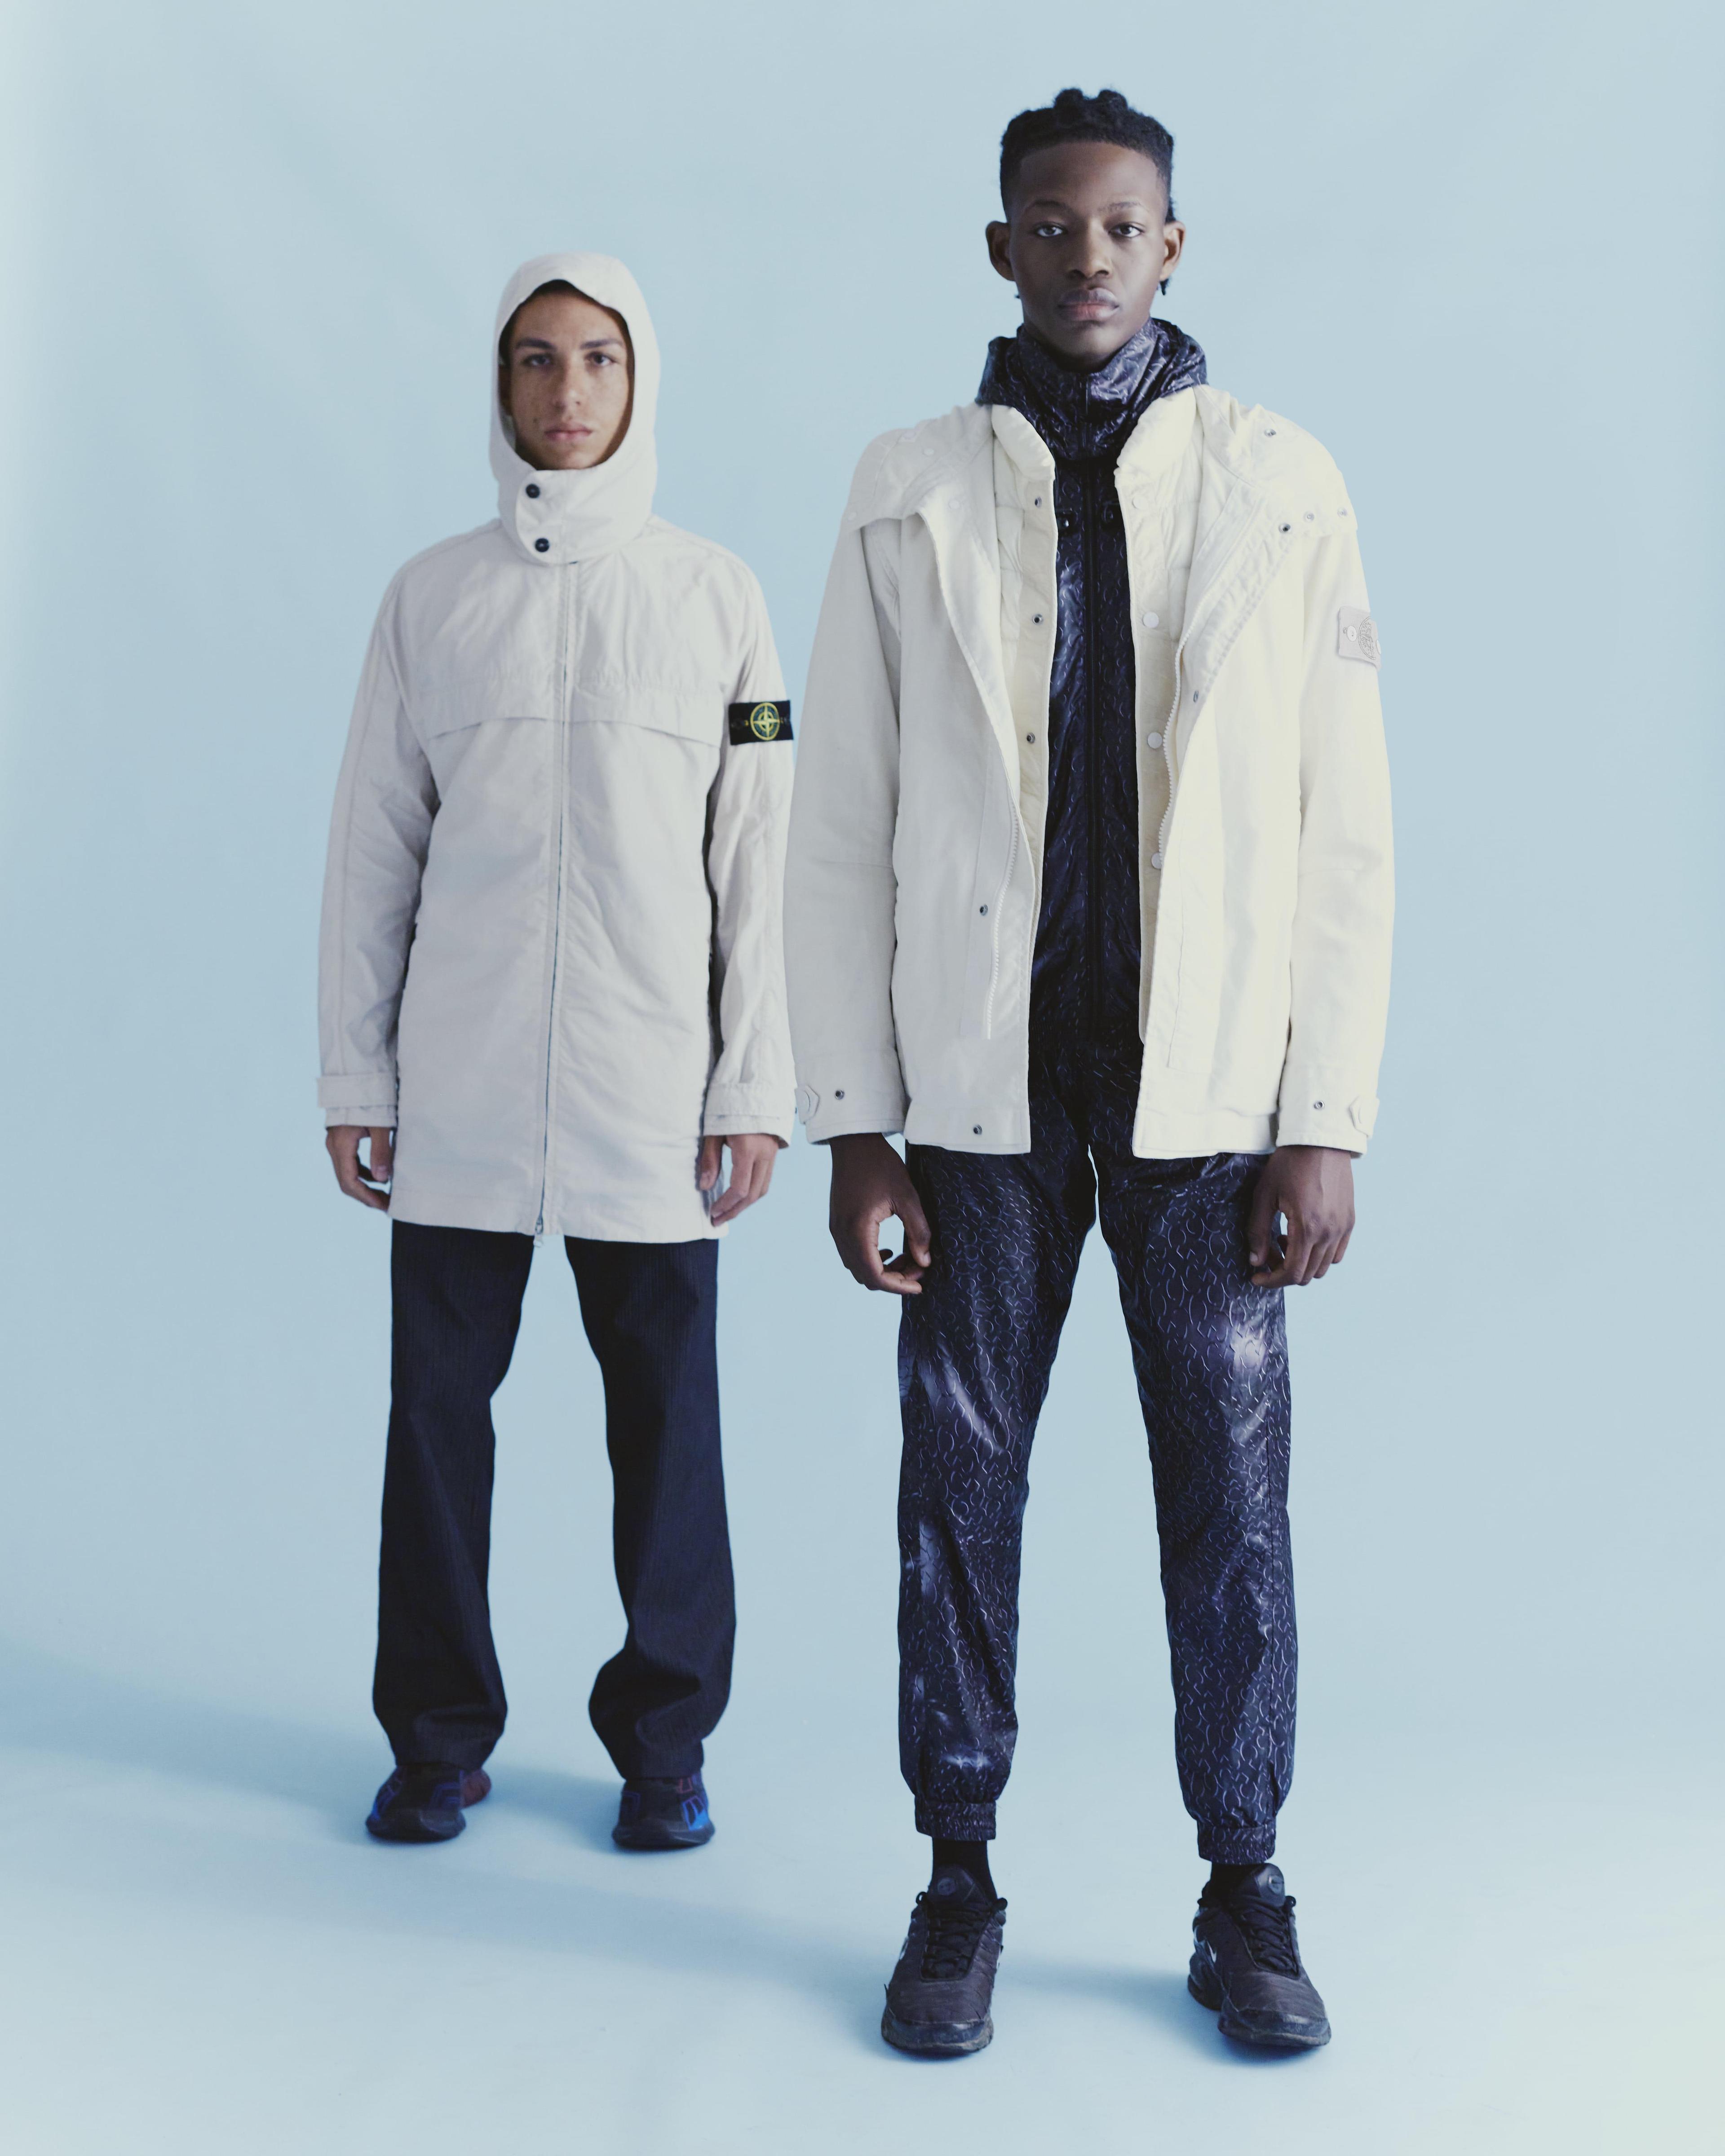 Christian wears Stone Island and Peter Donghun Han, Mattie wears Cottweiler and Stone Island, shot in London